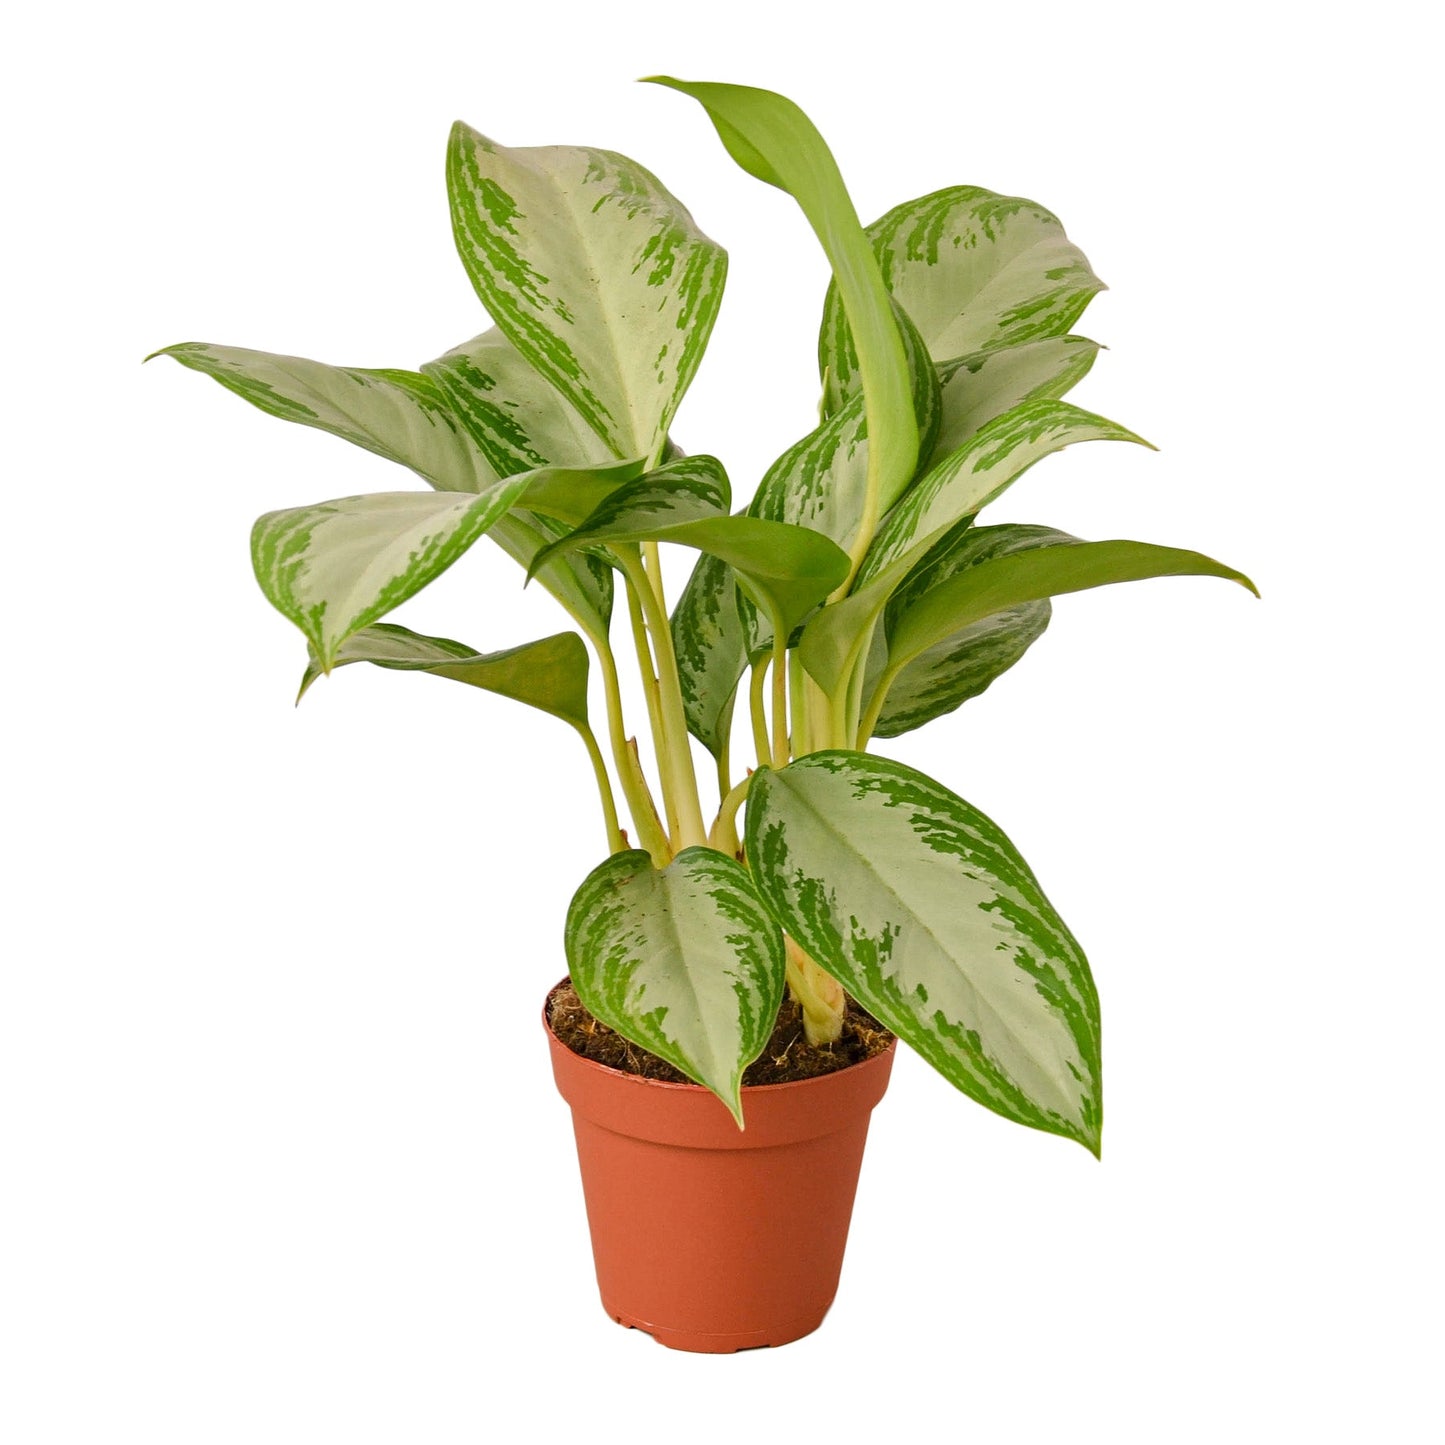 Chinese Evergreen 'Silver Bay' - 4" Pot - NURSERY POT ONLY - One Beleaf Away Plant Studio